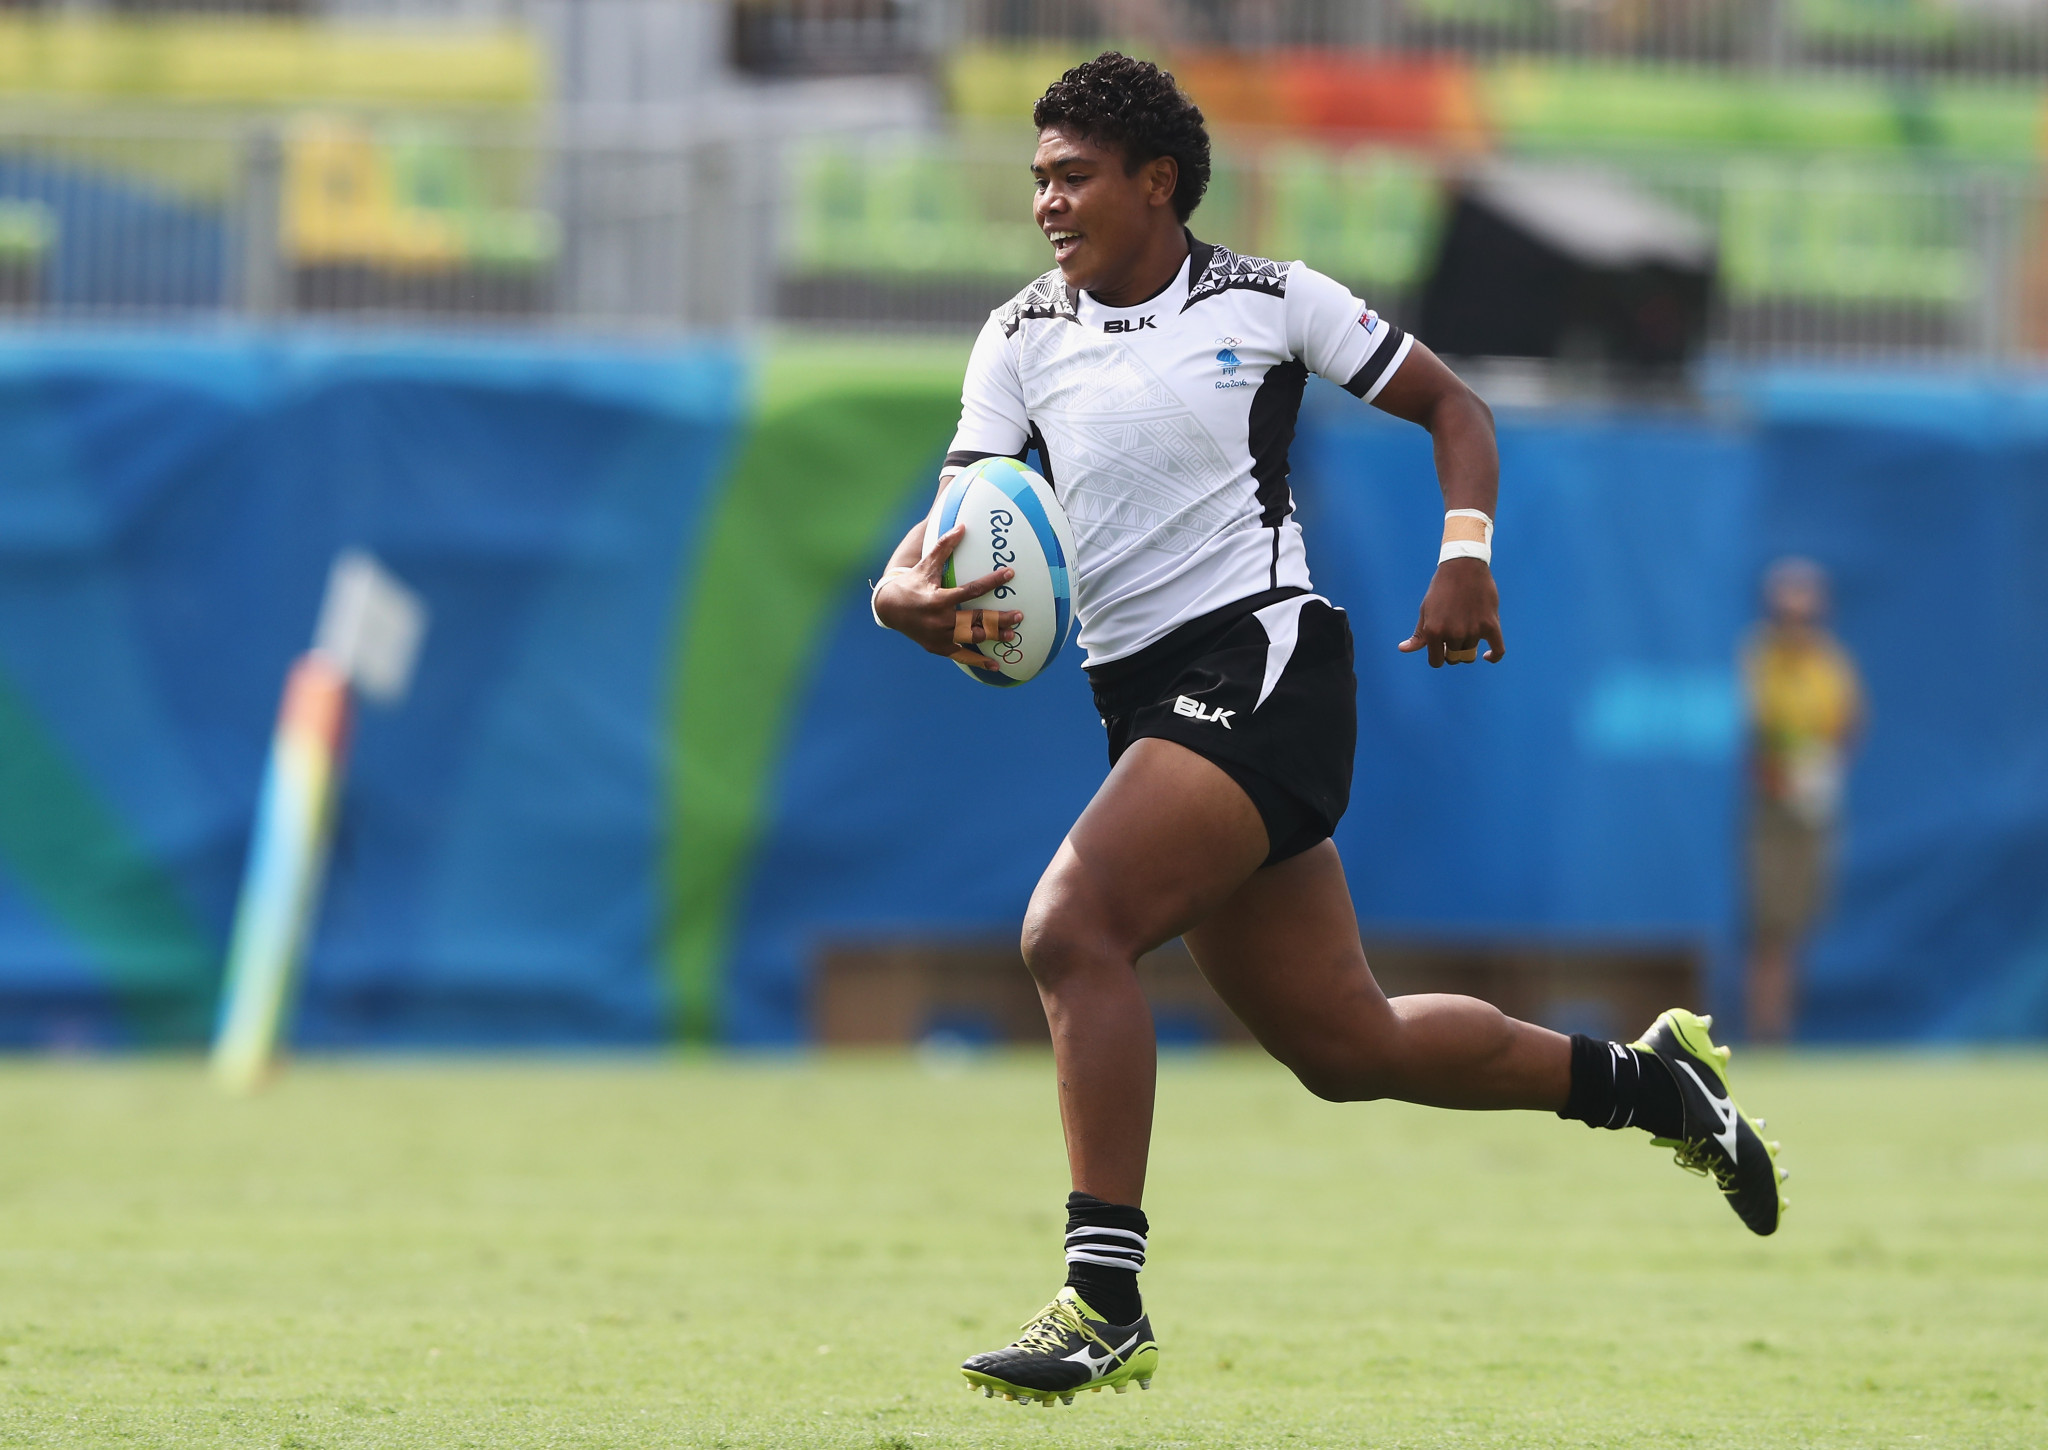 Rusila Nagasau is the captain of the women's rugby sevens team for Fiji ©Getty Images